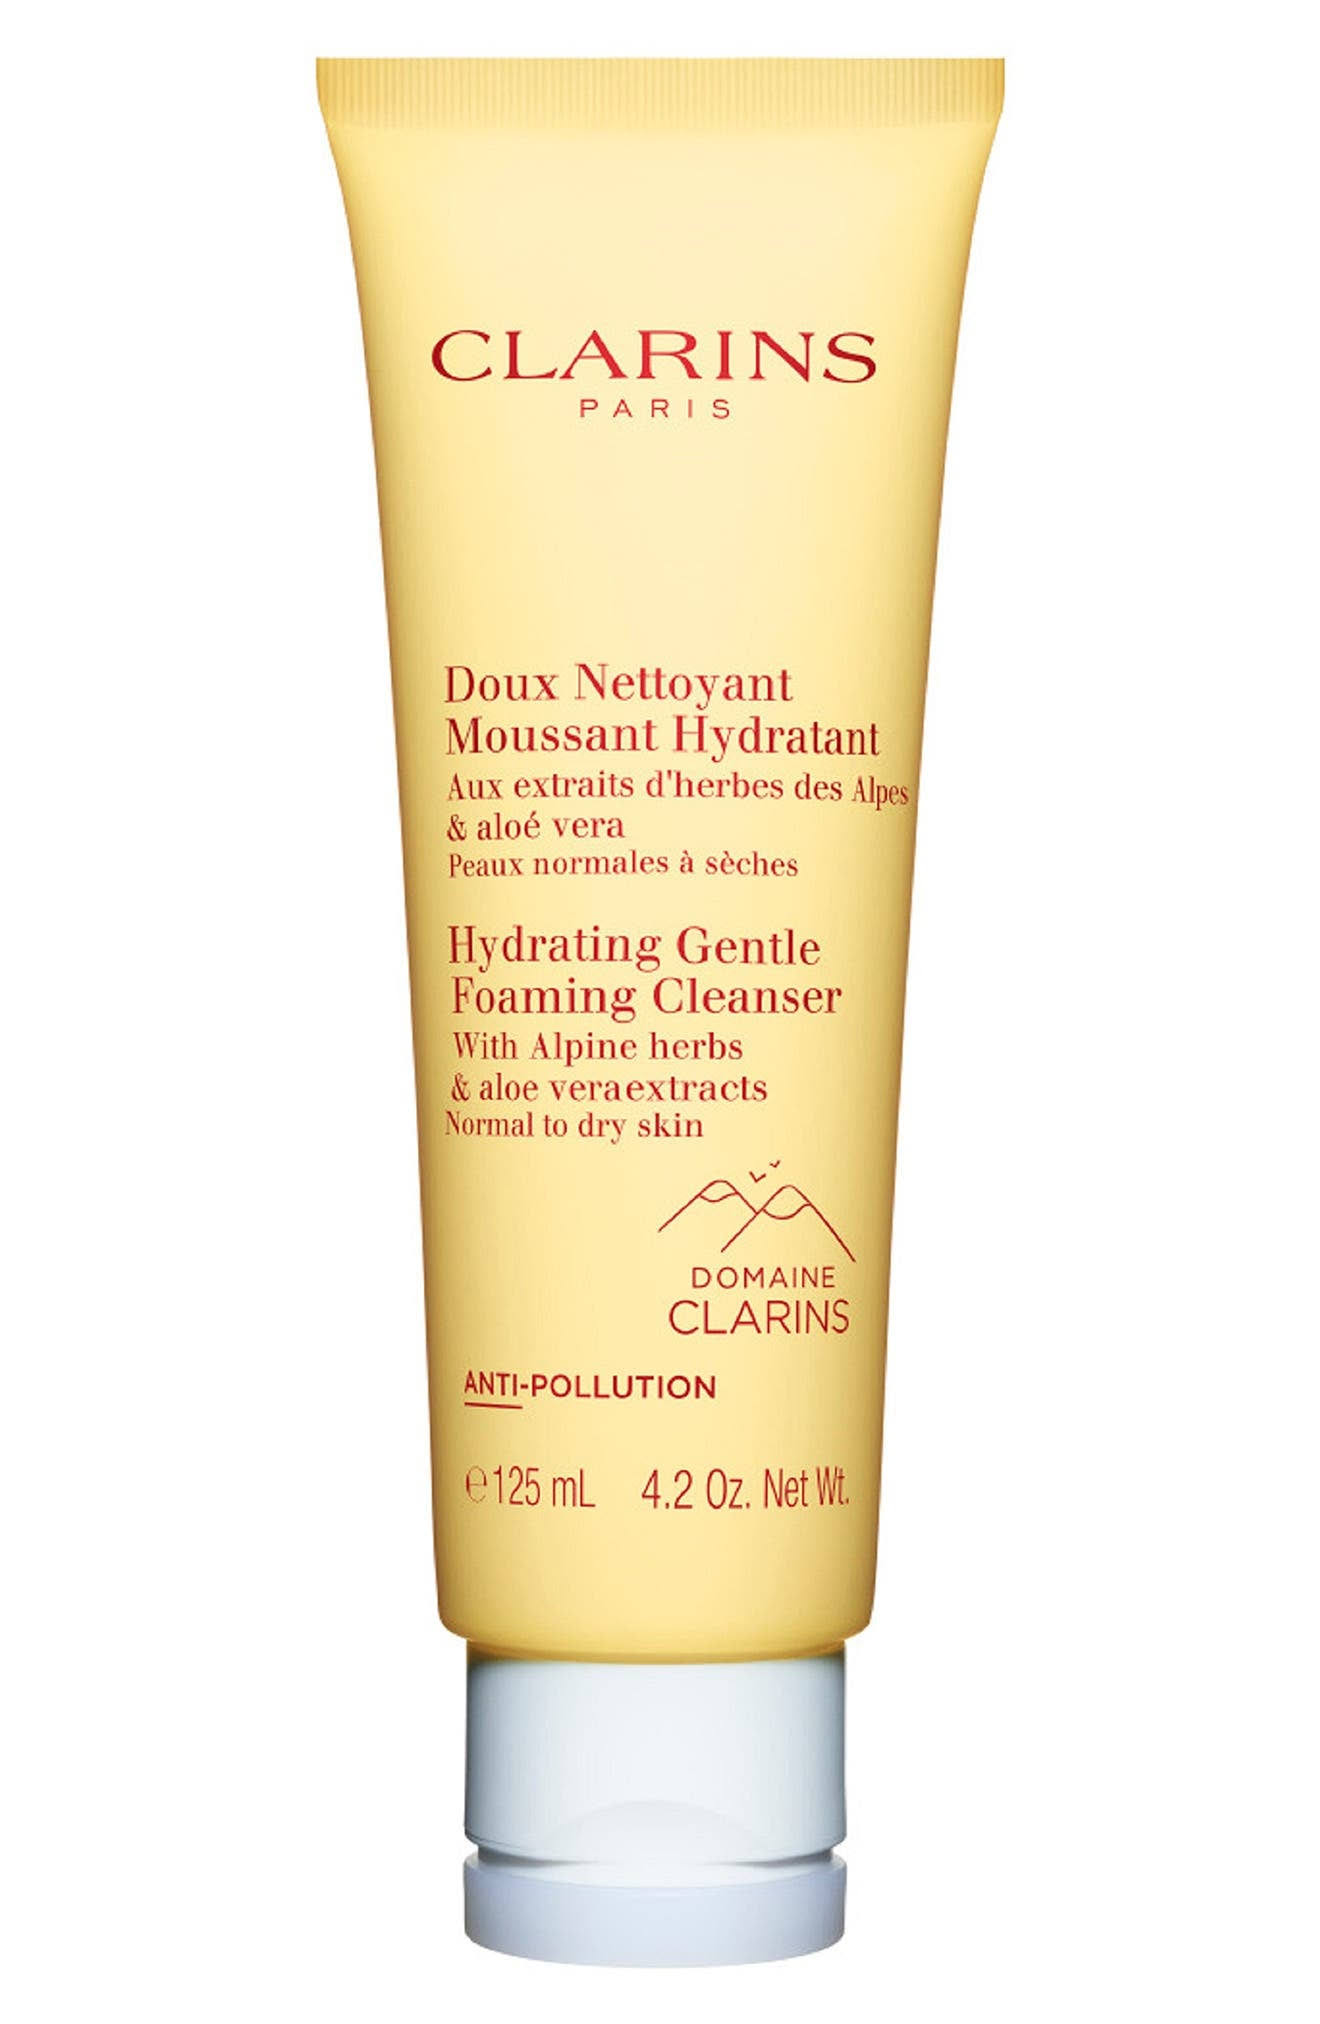 Clarins Hydrating Gentle Foaming Cleanser - 4.2 oz